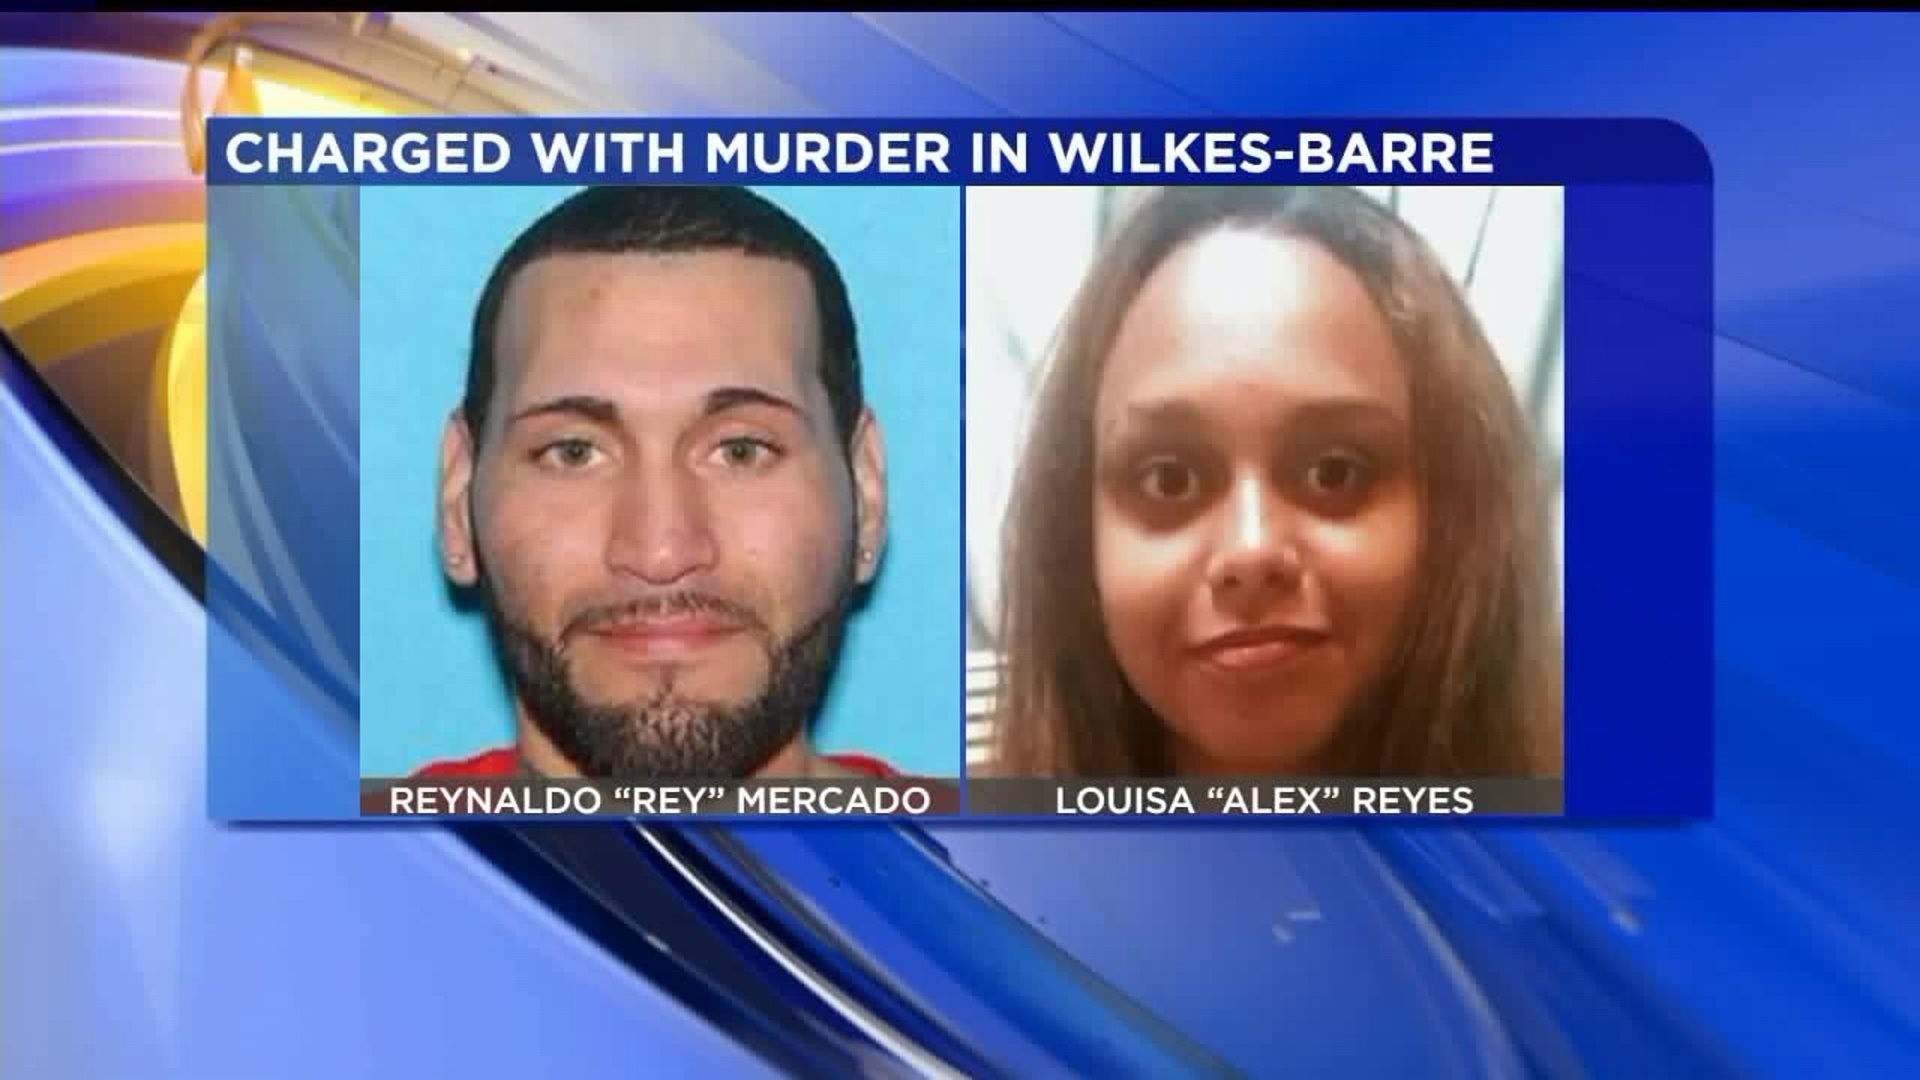 Preliminary Hearing for Stabbing Death Suspects in Wilkes-Barre